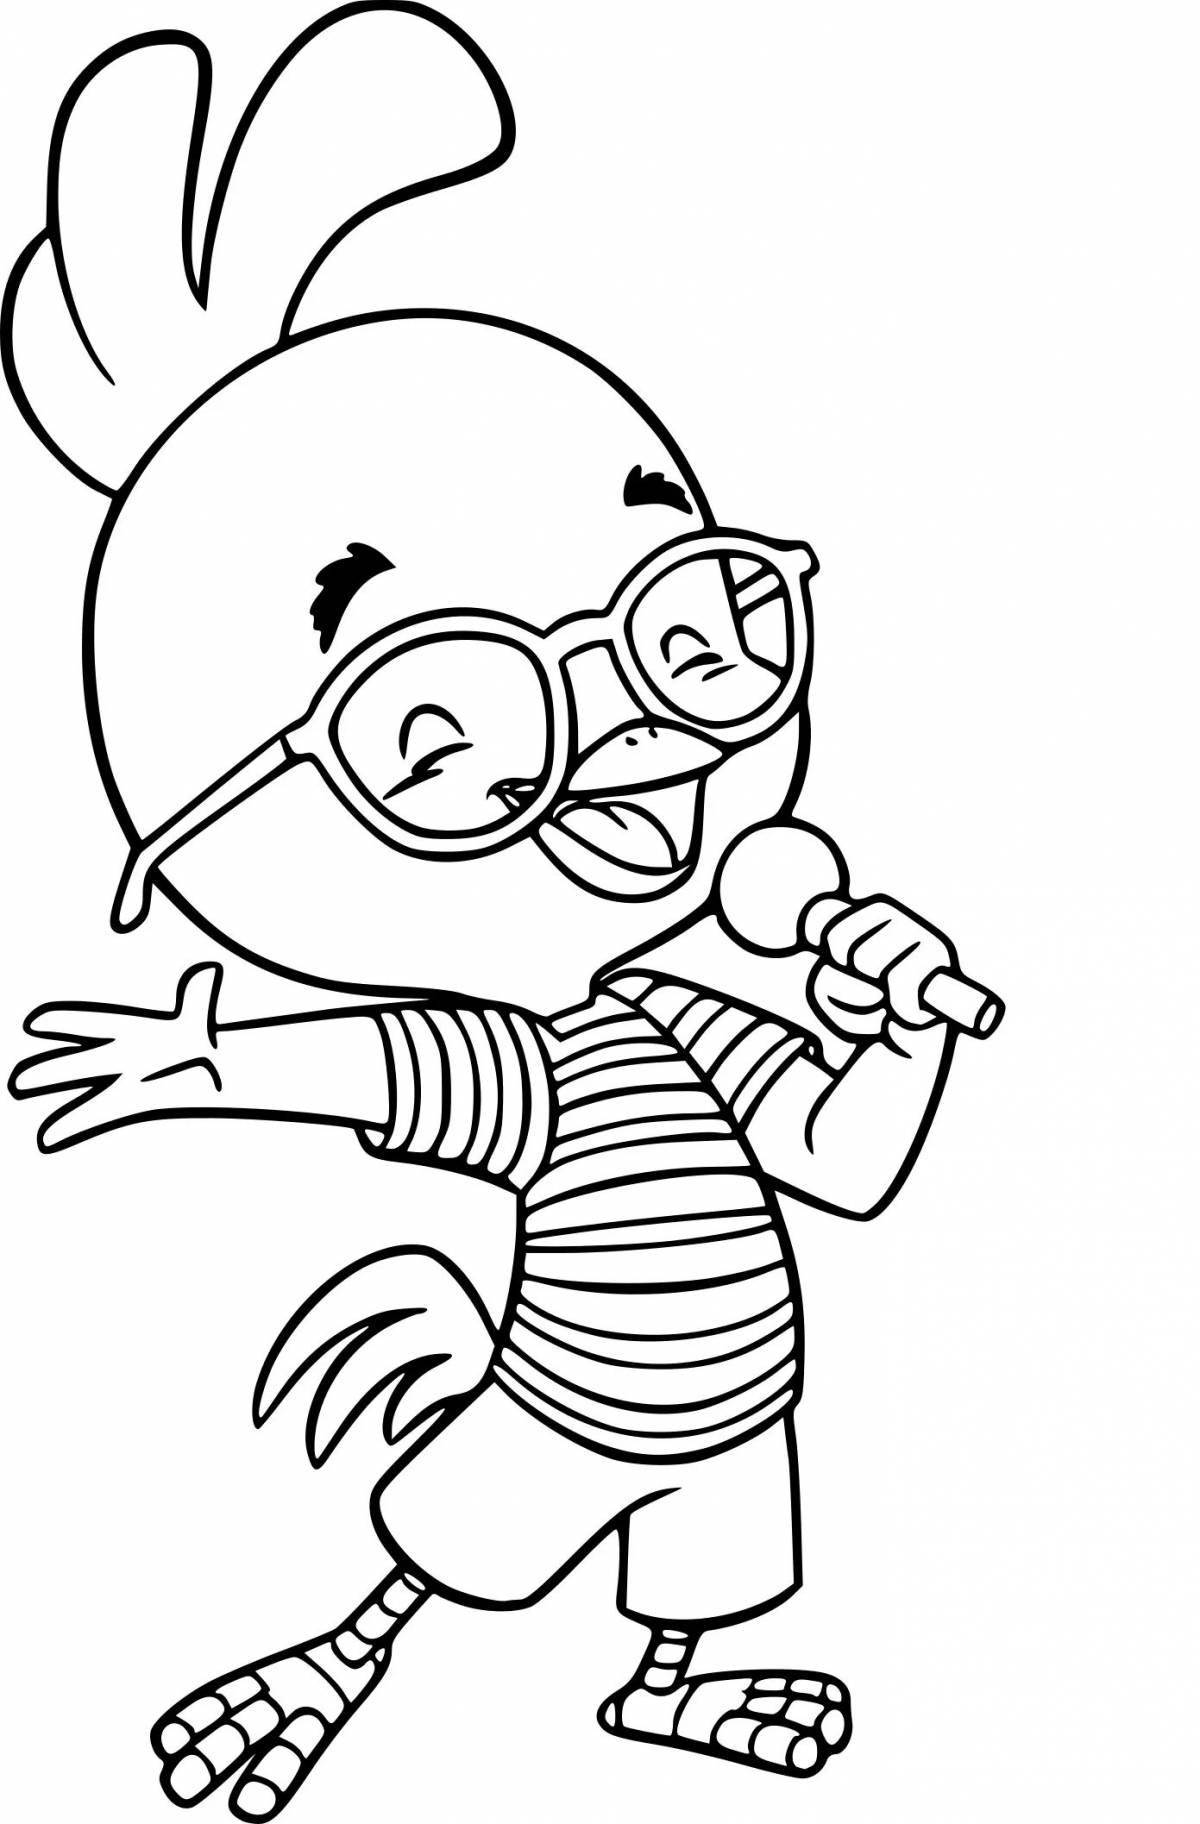 Chicken at play coloring page